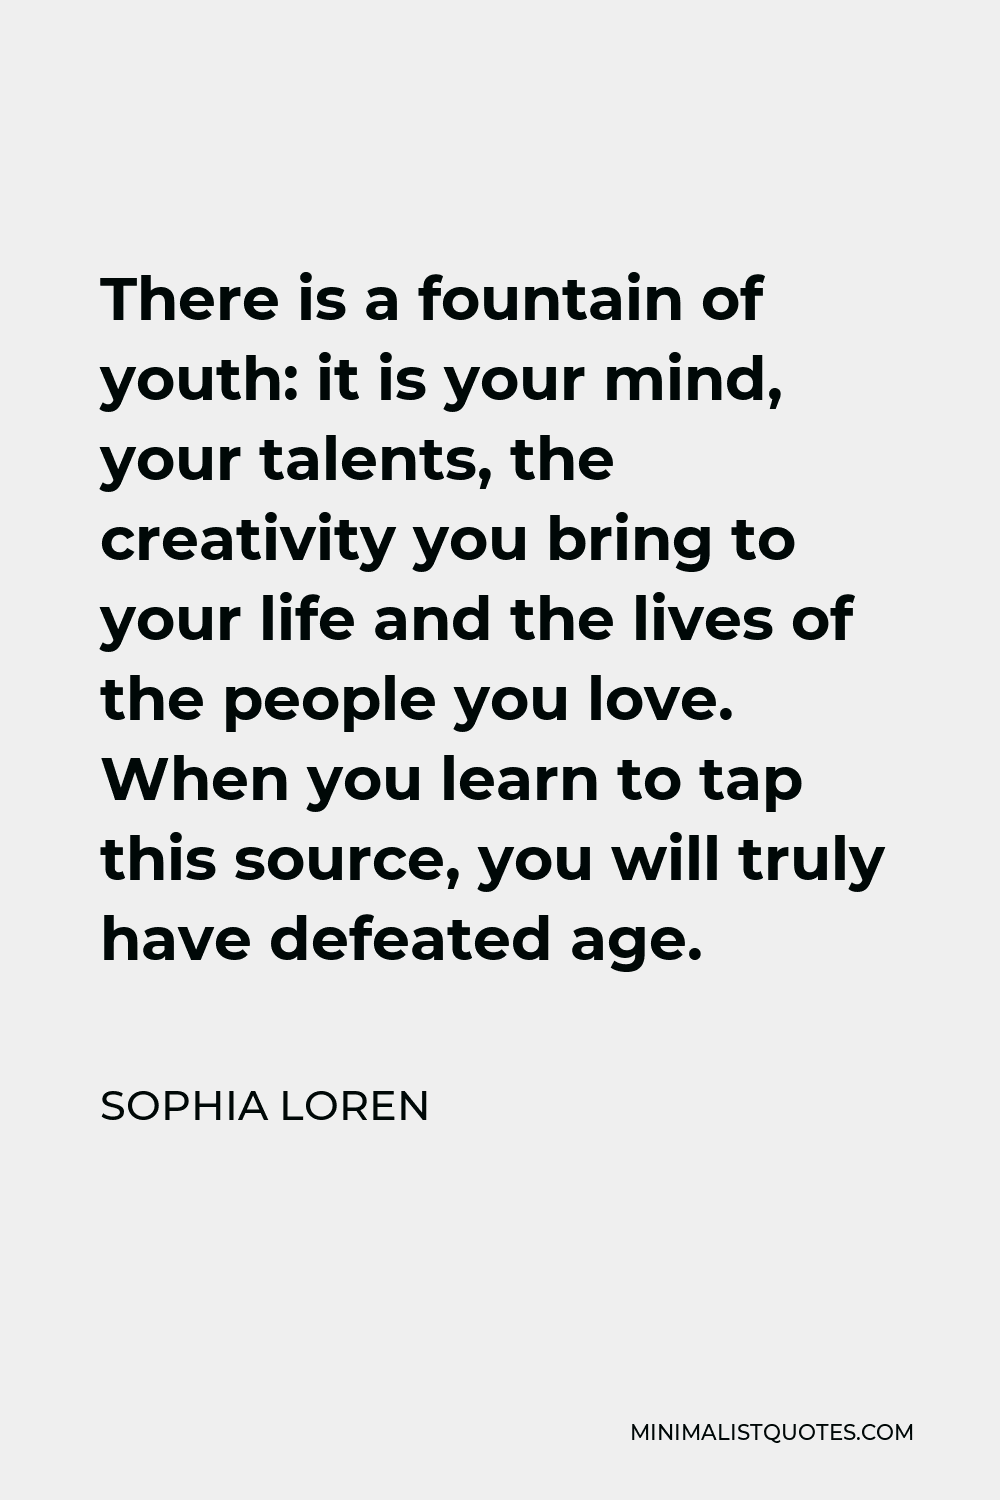 Sophia Loren Quote - There is a fountain of youth: it is your mind, your talents, the creativity you bring to your life and the lives of the people you love. When you learn to tap this source, you will truly have defeated age.